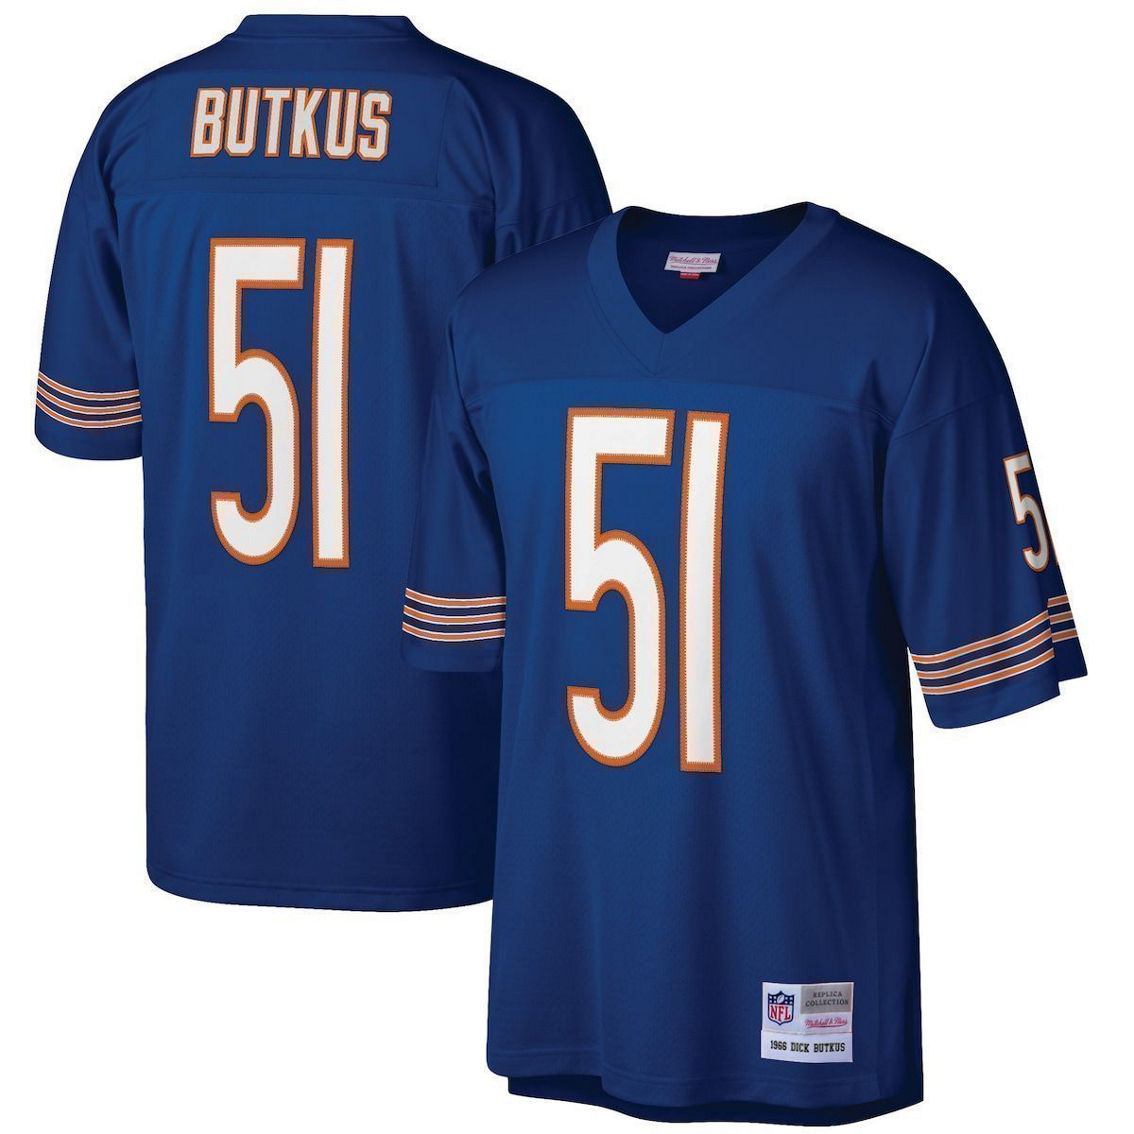 Mitchell & Ness Men's Dick Butkus Navy Chicago Bears Retired Player Legacy Replica Jersey - Image 2 of 4